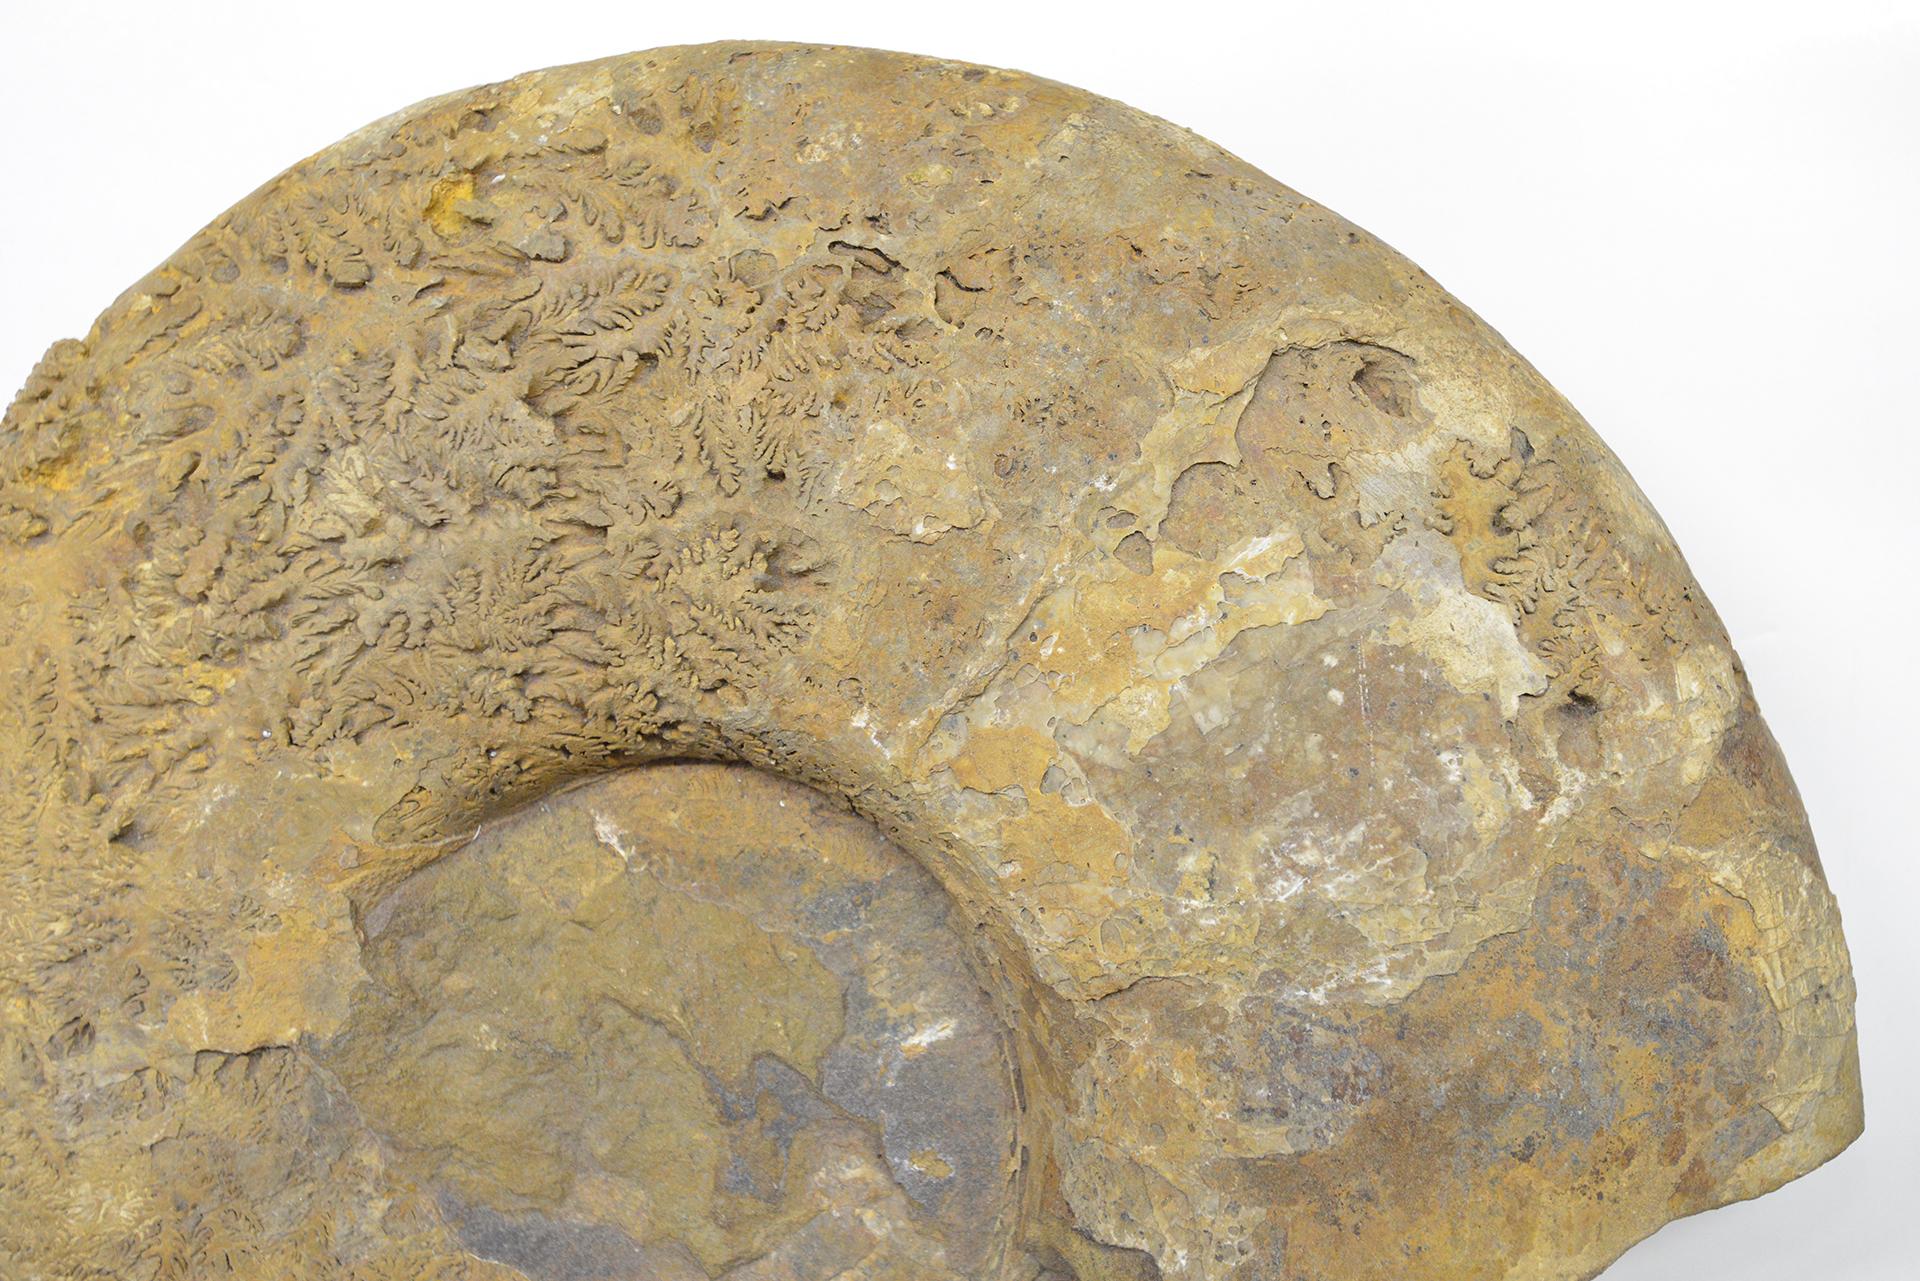 Other Large Fossil Stone Ammonite For Sale